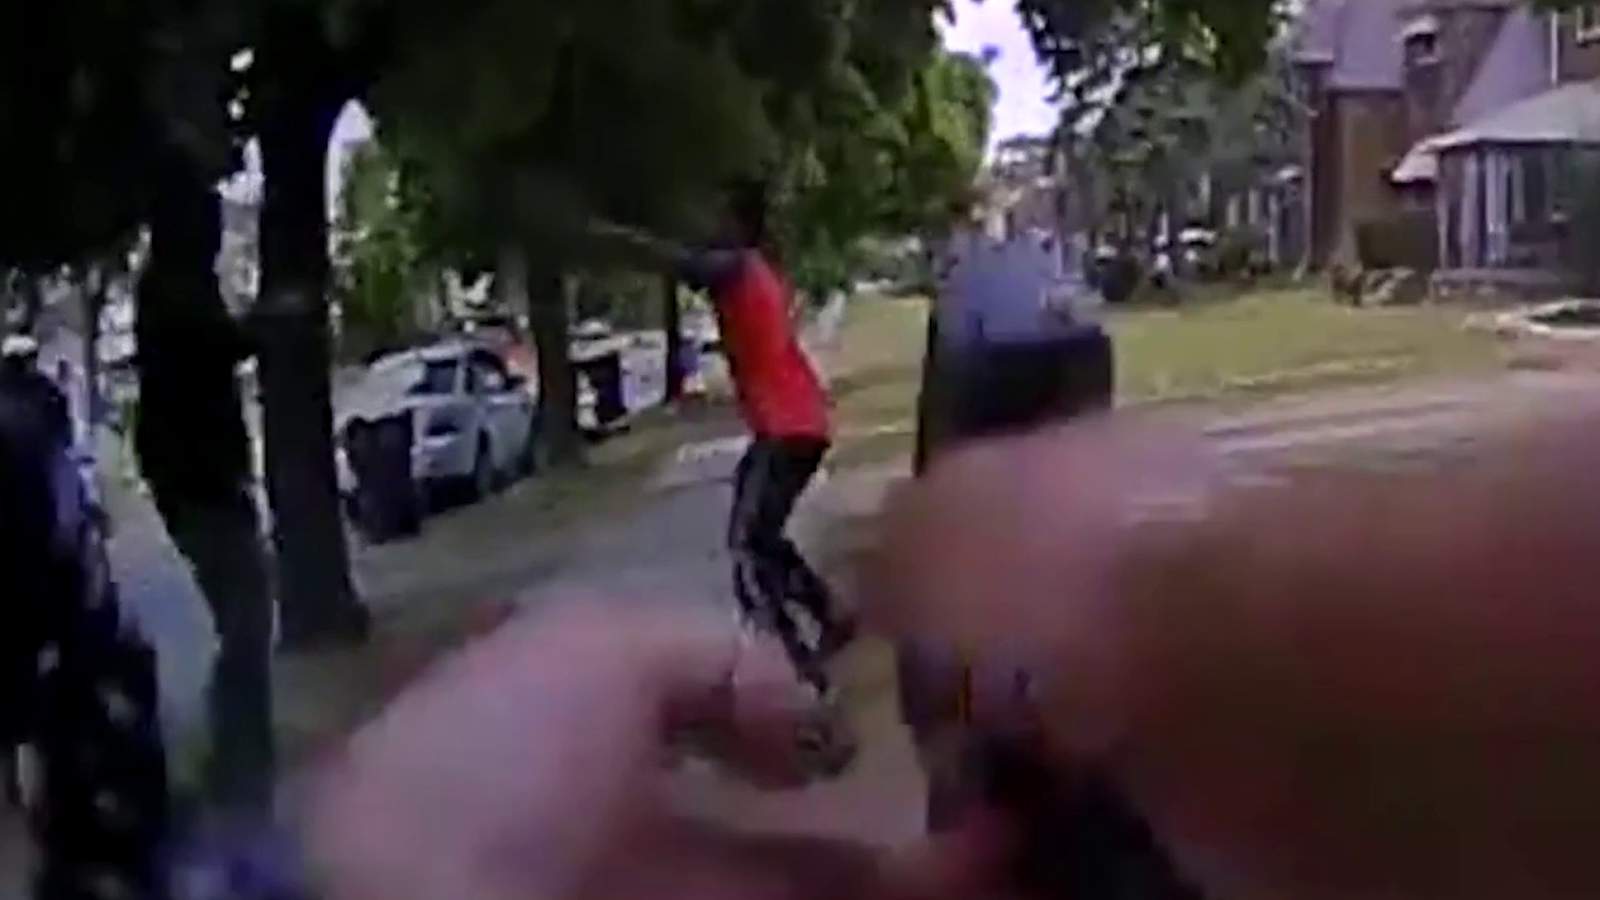 Detroit police release body camera footage of fatal officer-involved shooting